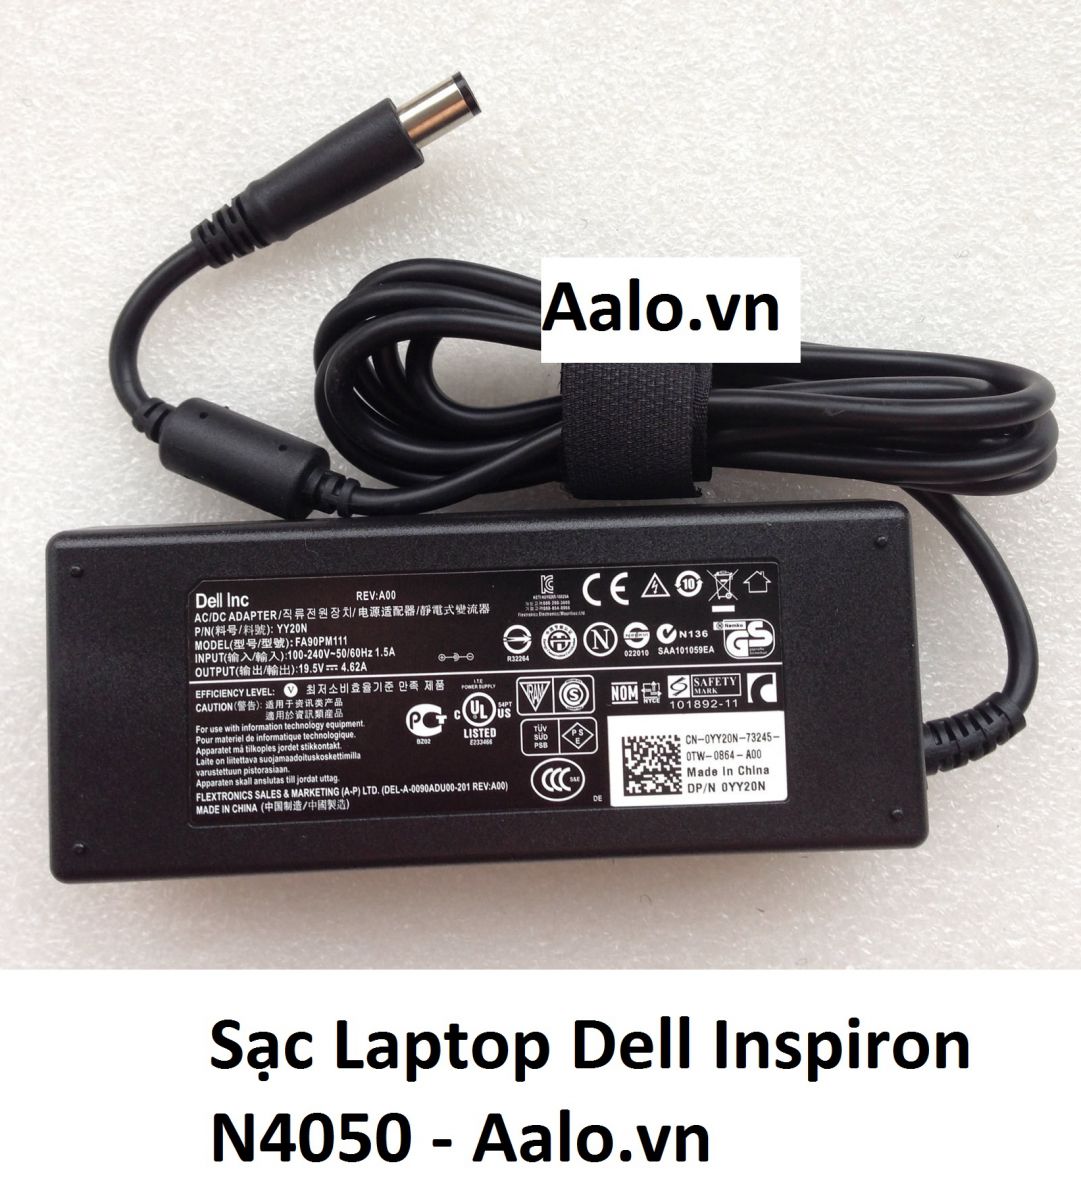 Sạc Laptop Dell Inspiron N4050 - Aalo.vn